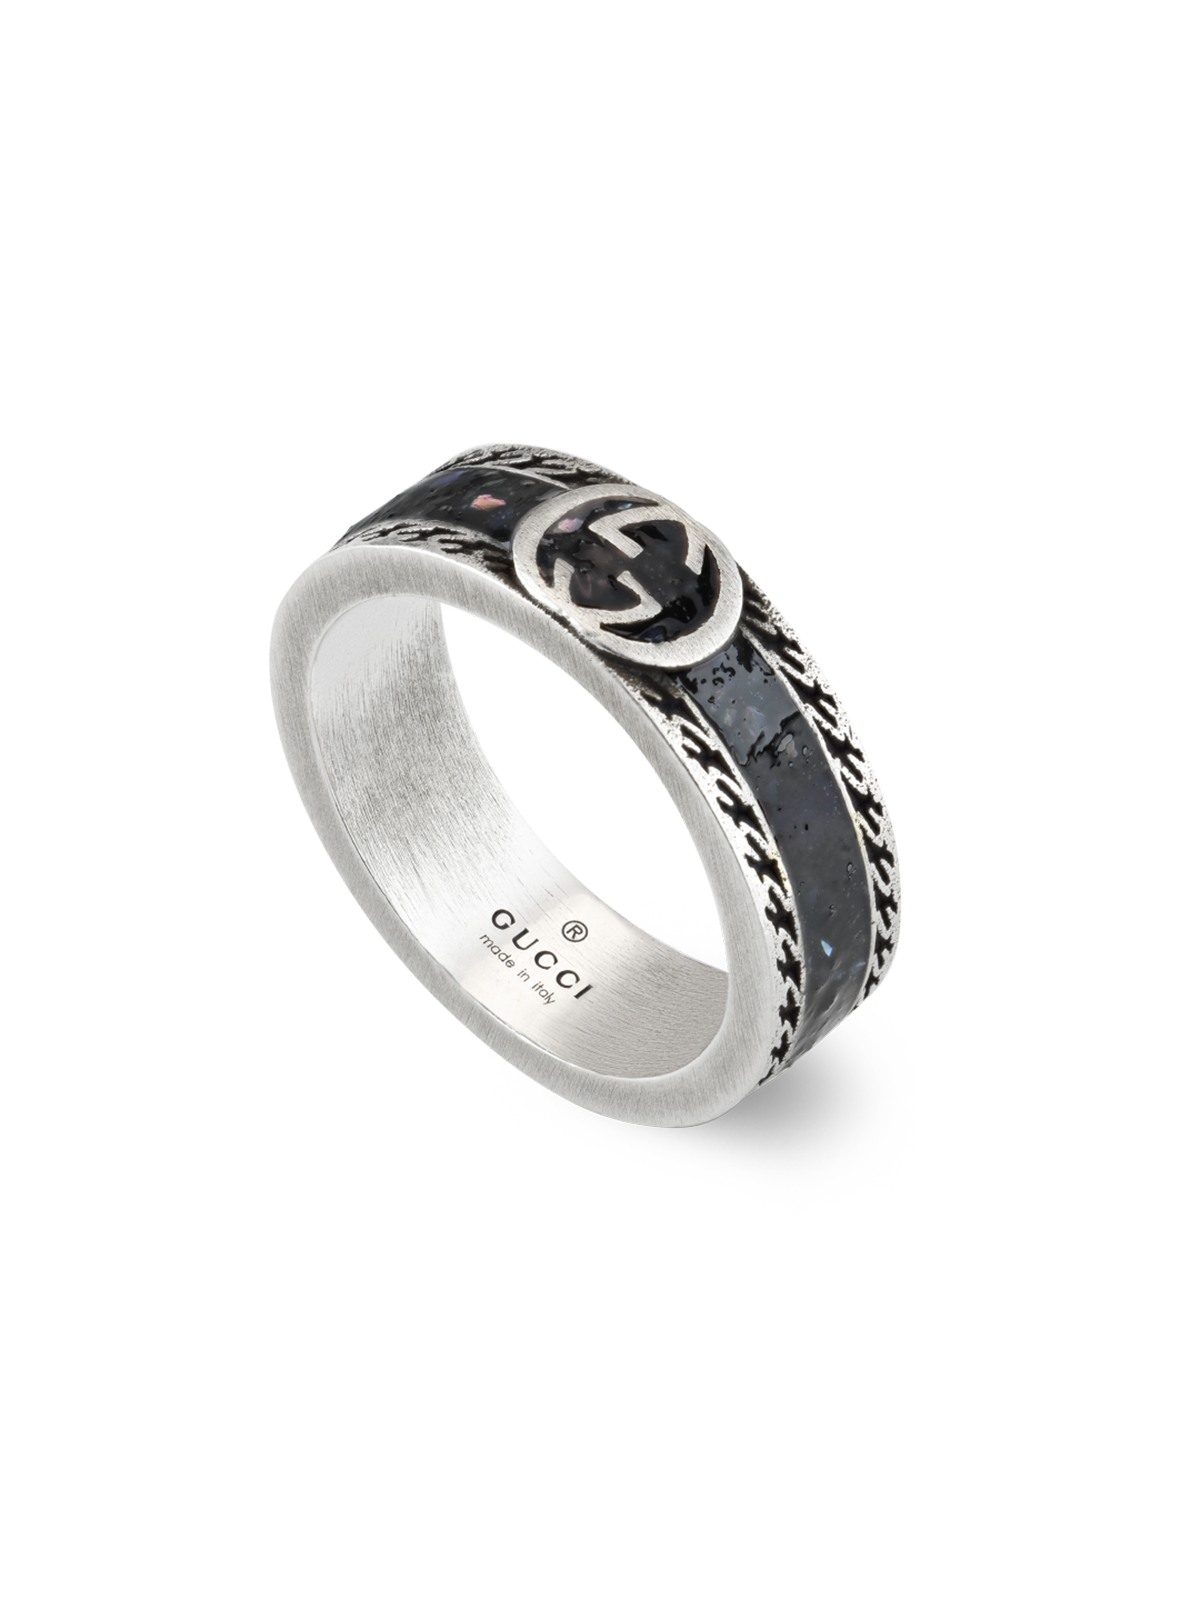 Gucci Interlocking G Ring in Silver - Size 14